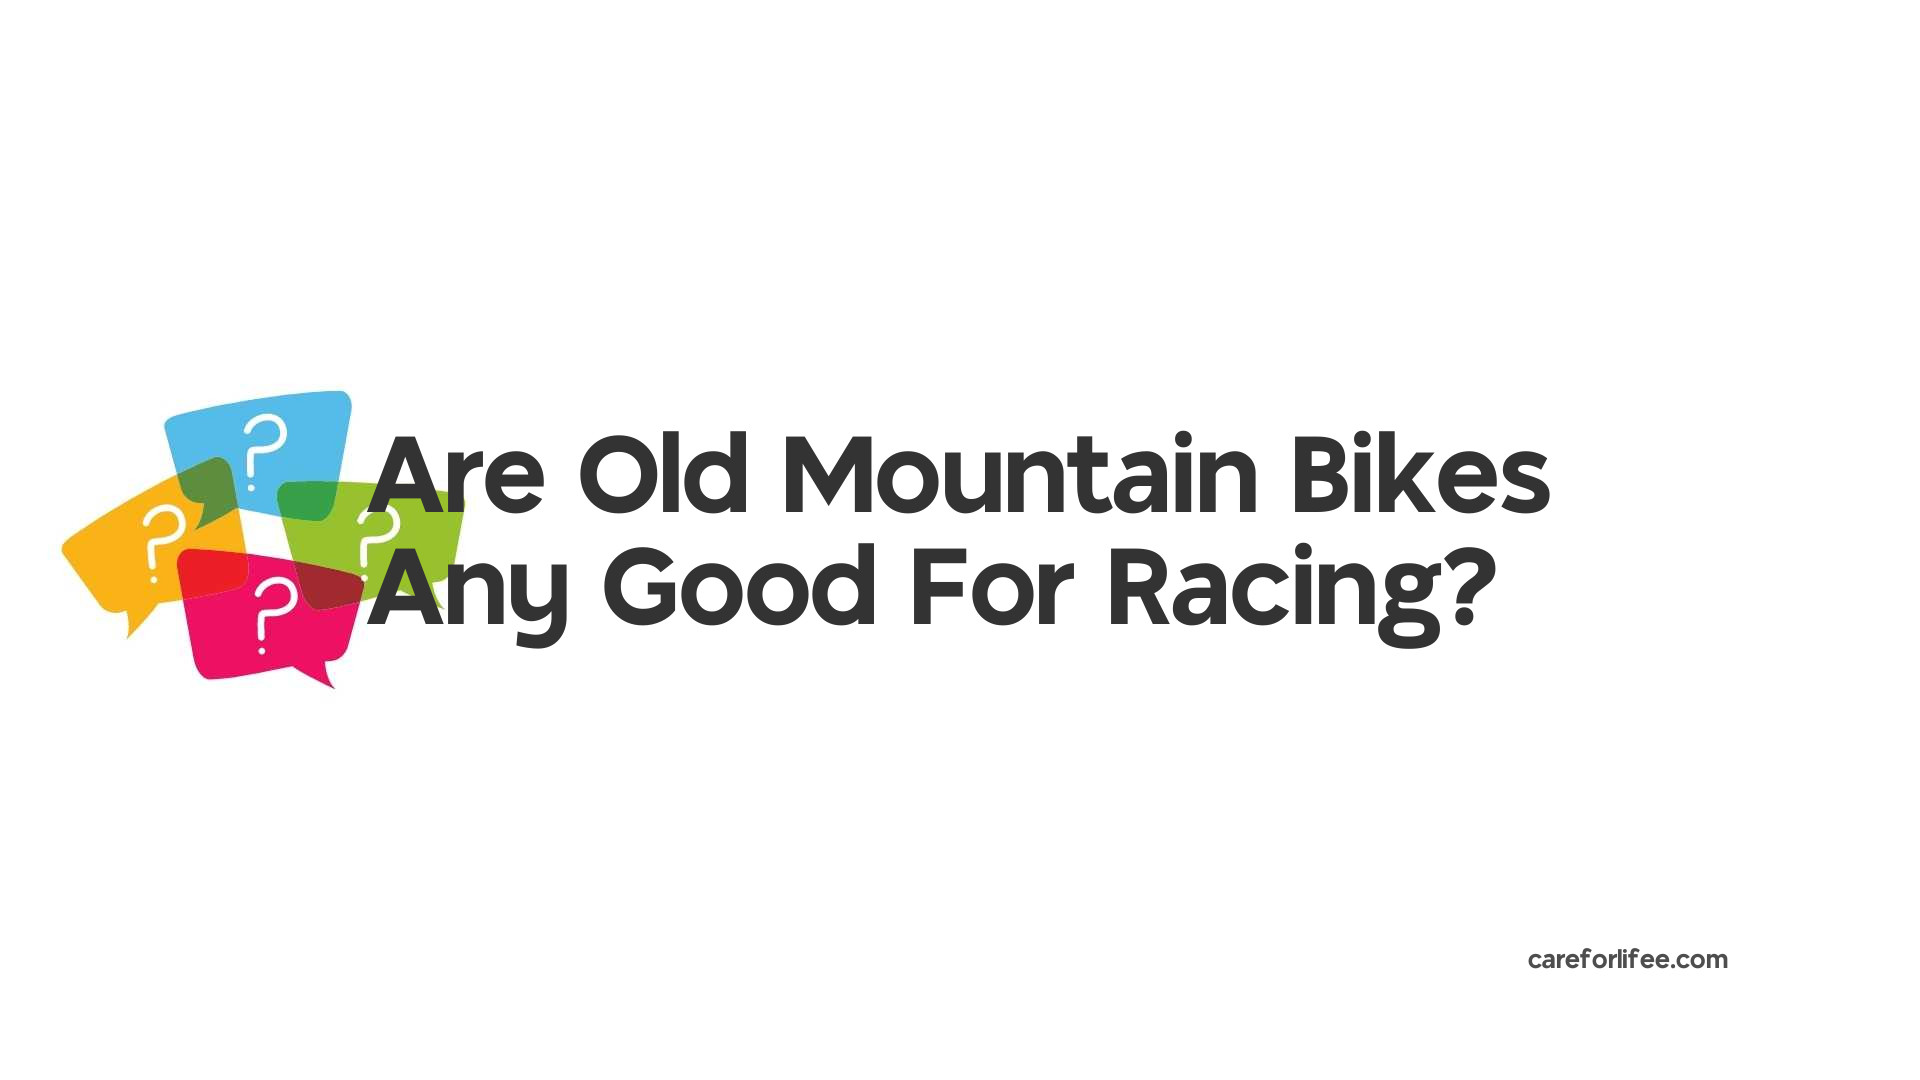 Are Old Mountain Bikes Any Good For Racing?